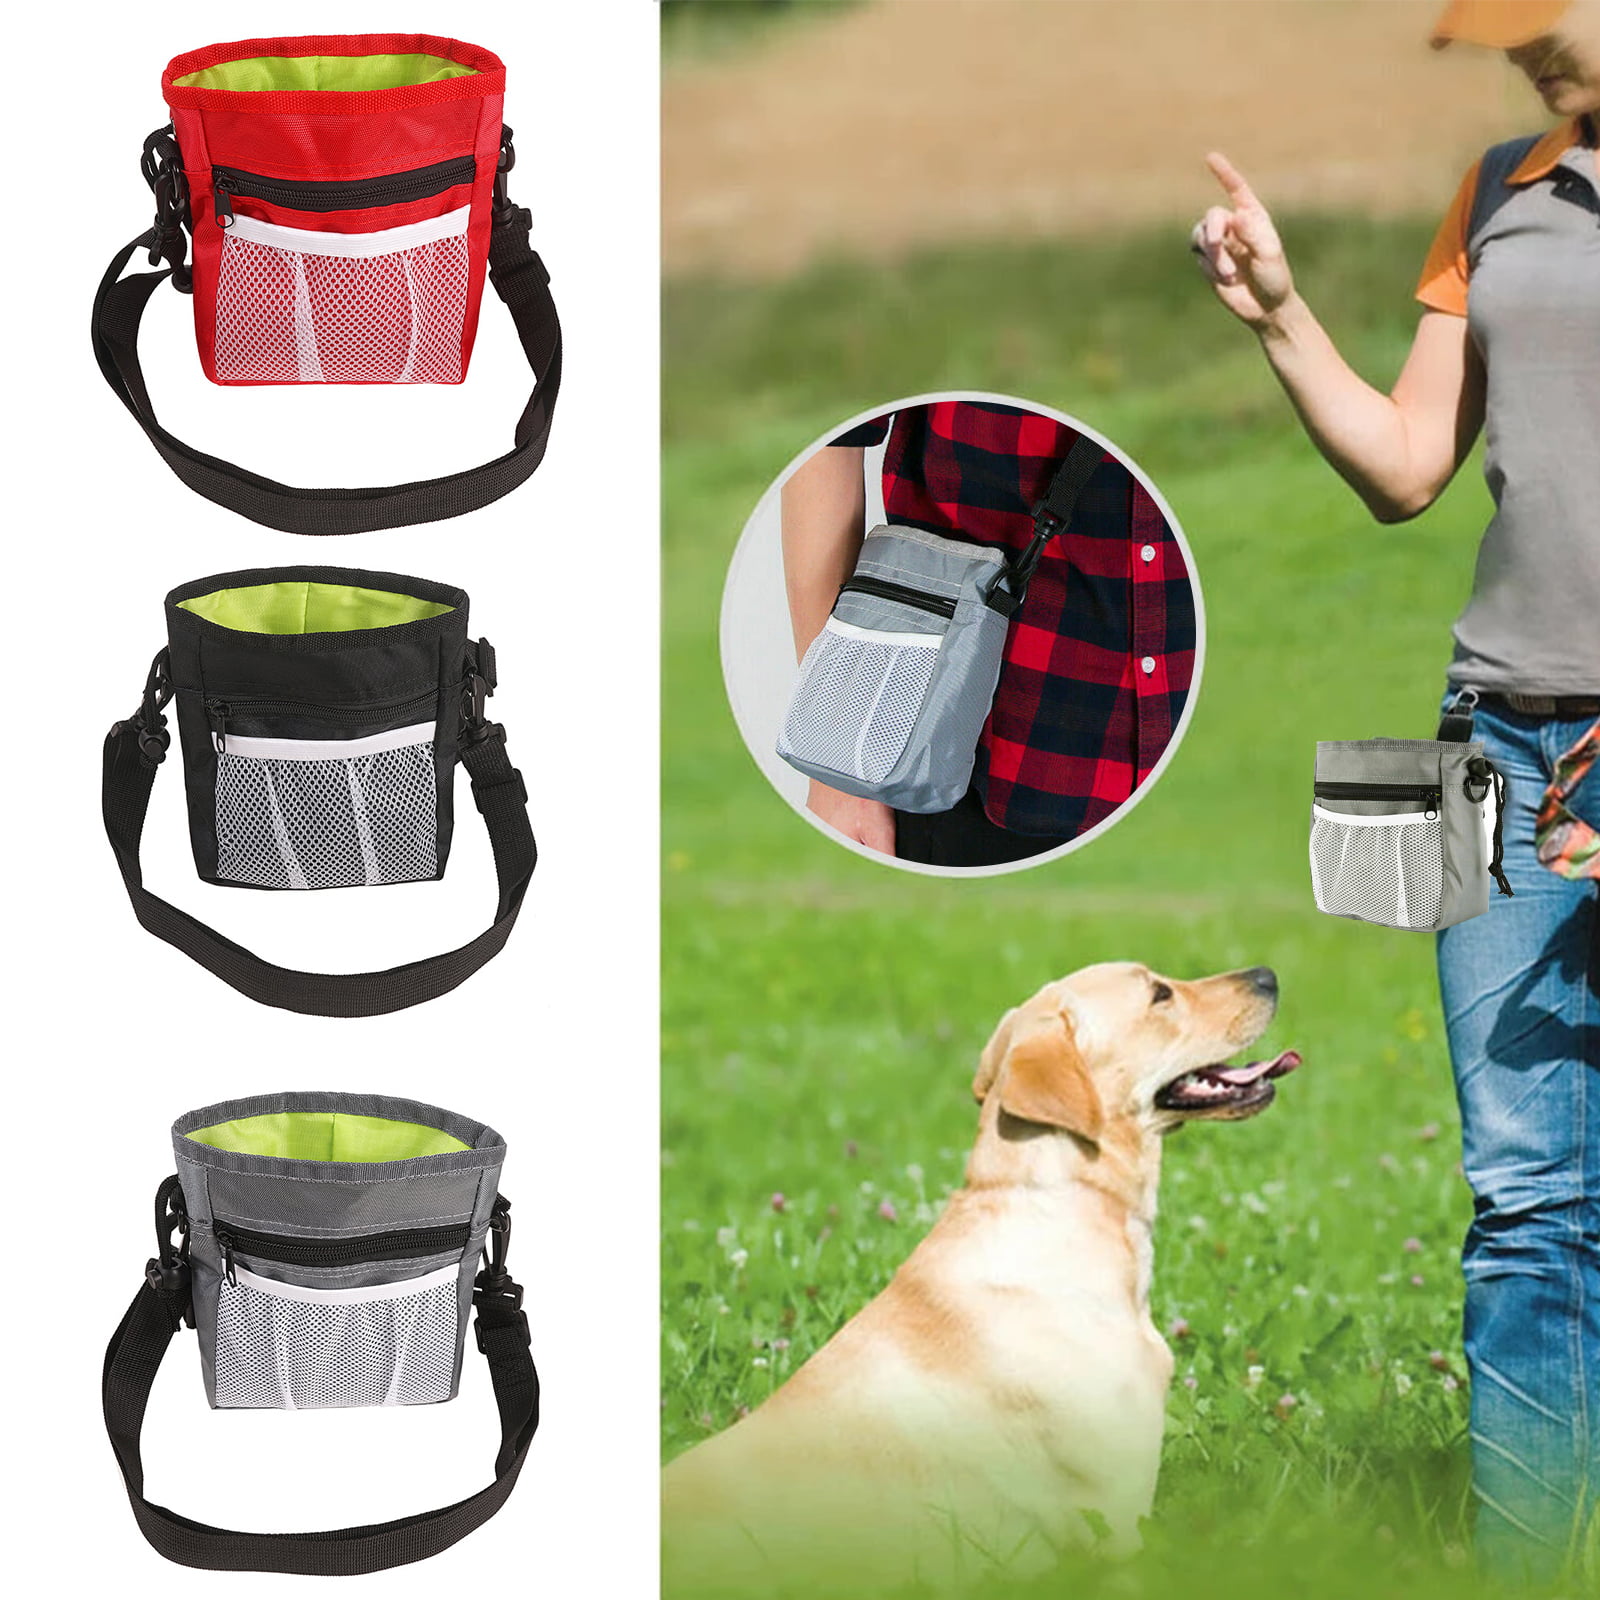 Adjustable Waist Belt and Shoulder Strap Waldseemuller Leather Dog Treat Pouch,Pet Training Bag,Dog Treat Training Pouch for Small to Large Dogs,Reward Pouch with Dog Treat Hold,3 Ways to Wear